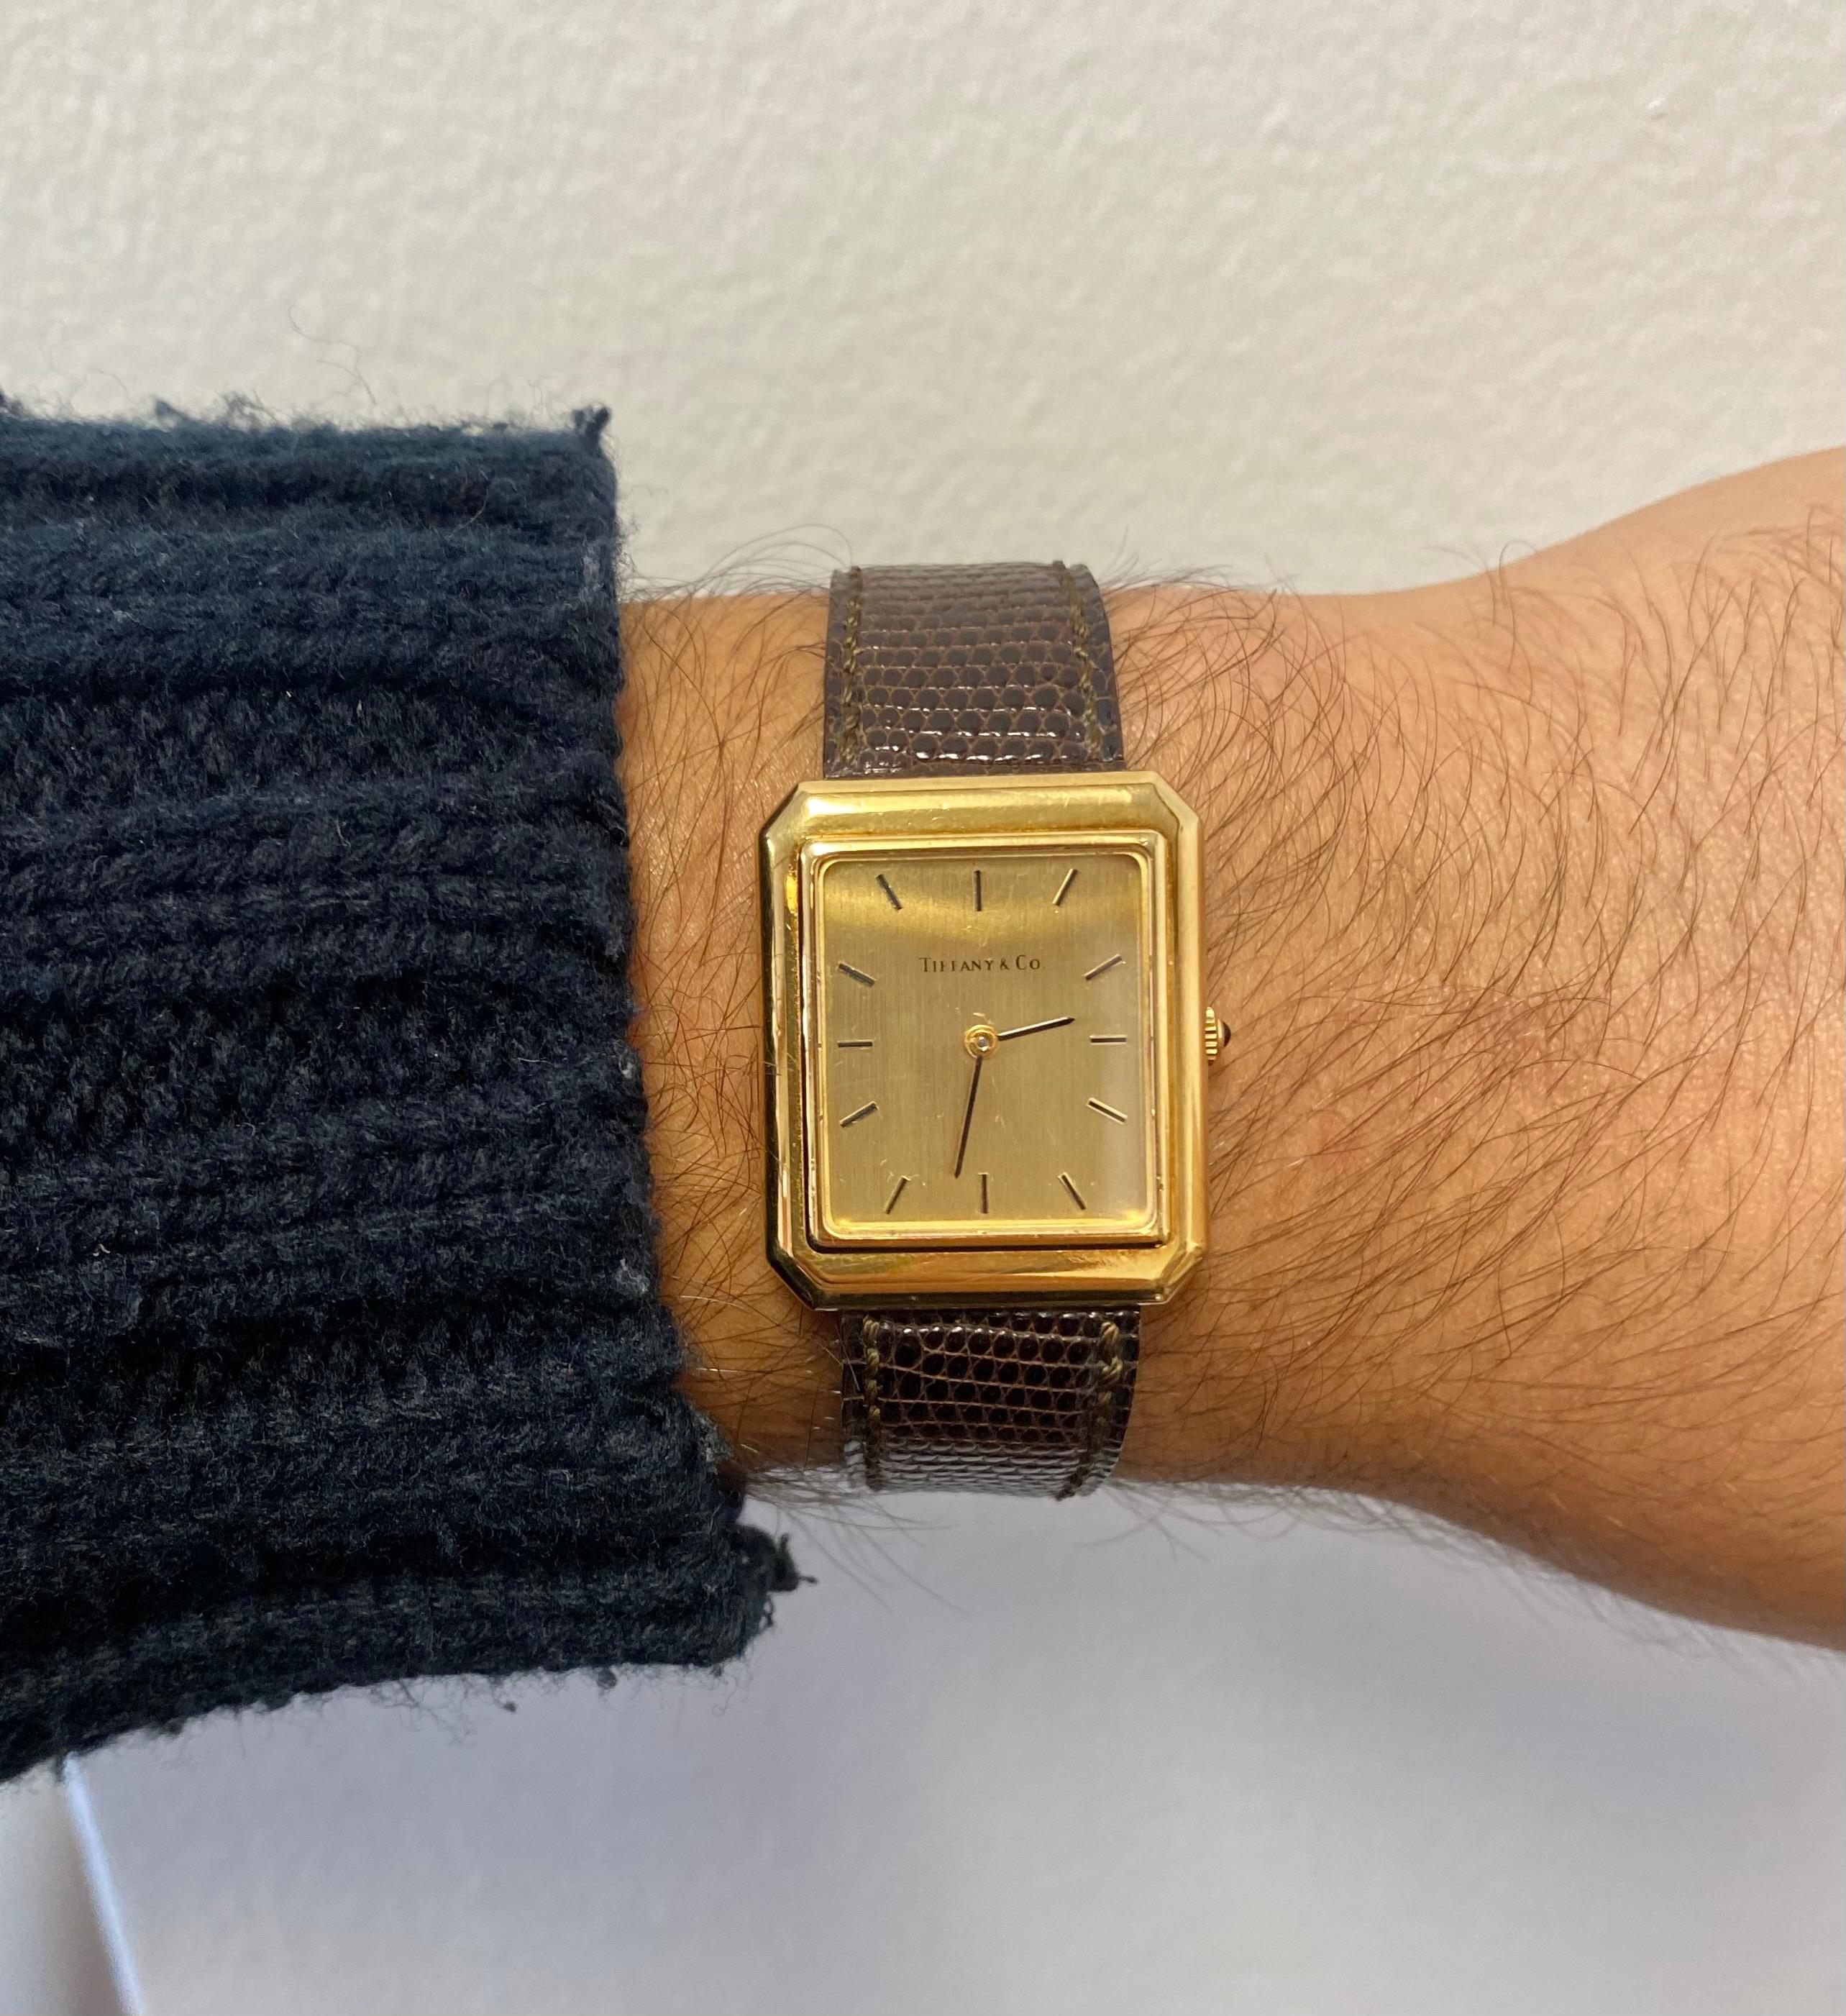 Unisex Tiffany & Co. Rectangular 18k Gold Watch with Original Leather Strap For Sale 5